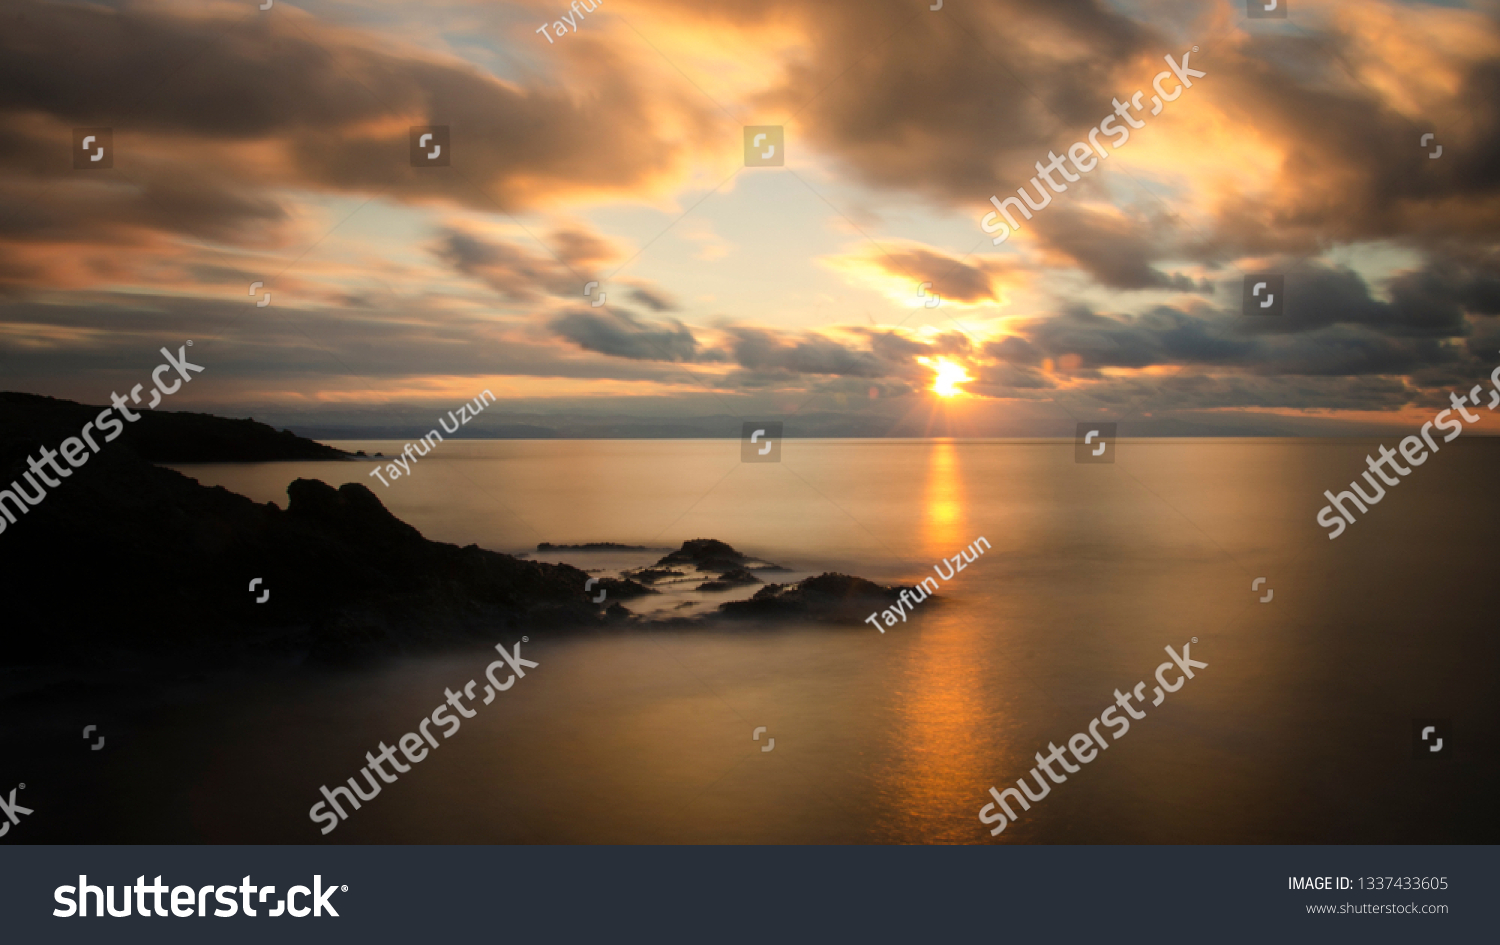 SUNSET, SEA, CLOUDS AND LONG SHUTTER #1337433605